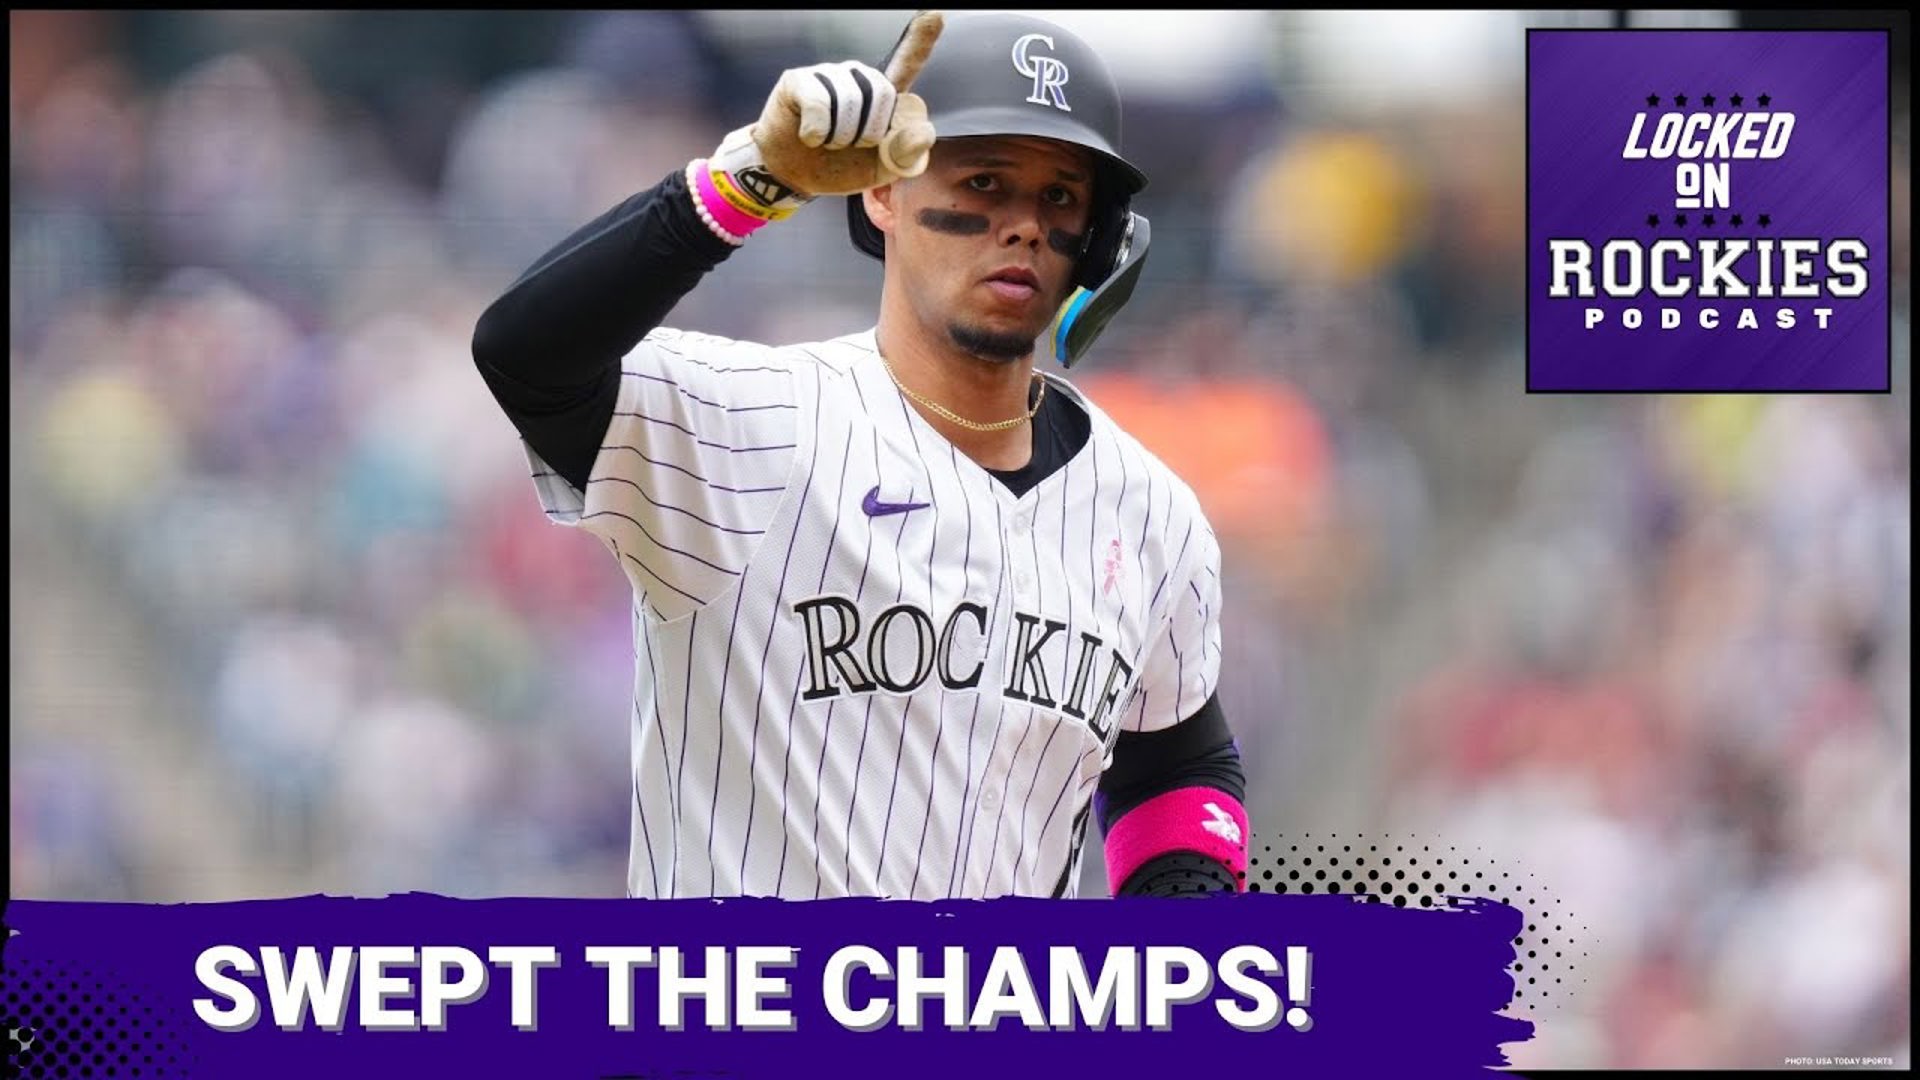 Quality starts, exceptional defense, and clutch hitting, the Colorado Rockies play their best baseball over the weekend sweeping the Texas Rangers.